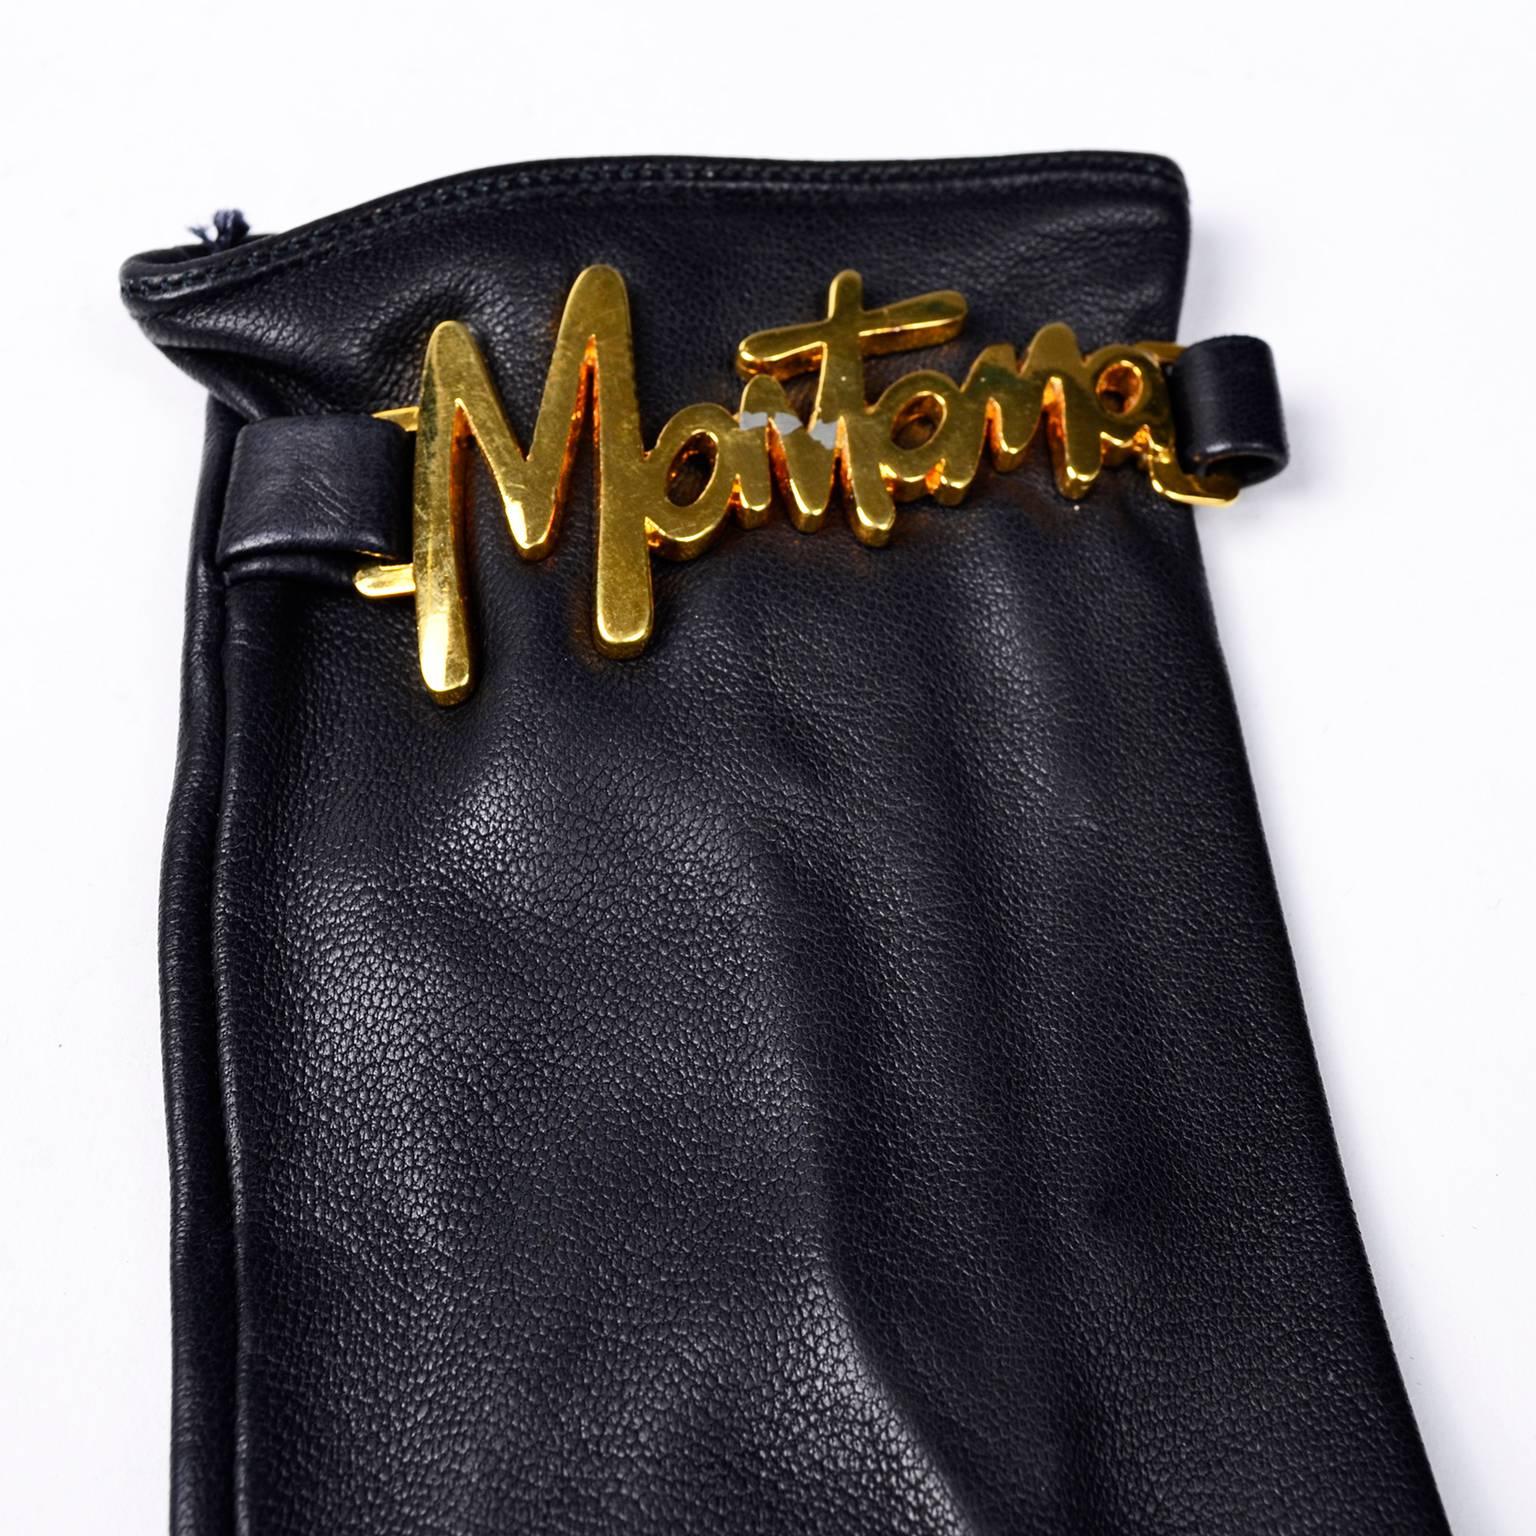 These are fabulous vintage Claude Montana black leather gloves with the word MONTANA across the wrists in gold tone metal.  These gloves have snaps in the back and measure 8 and 1/2 inches from the tip of the middle finger and 3